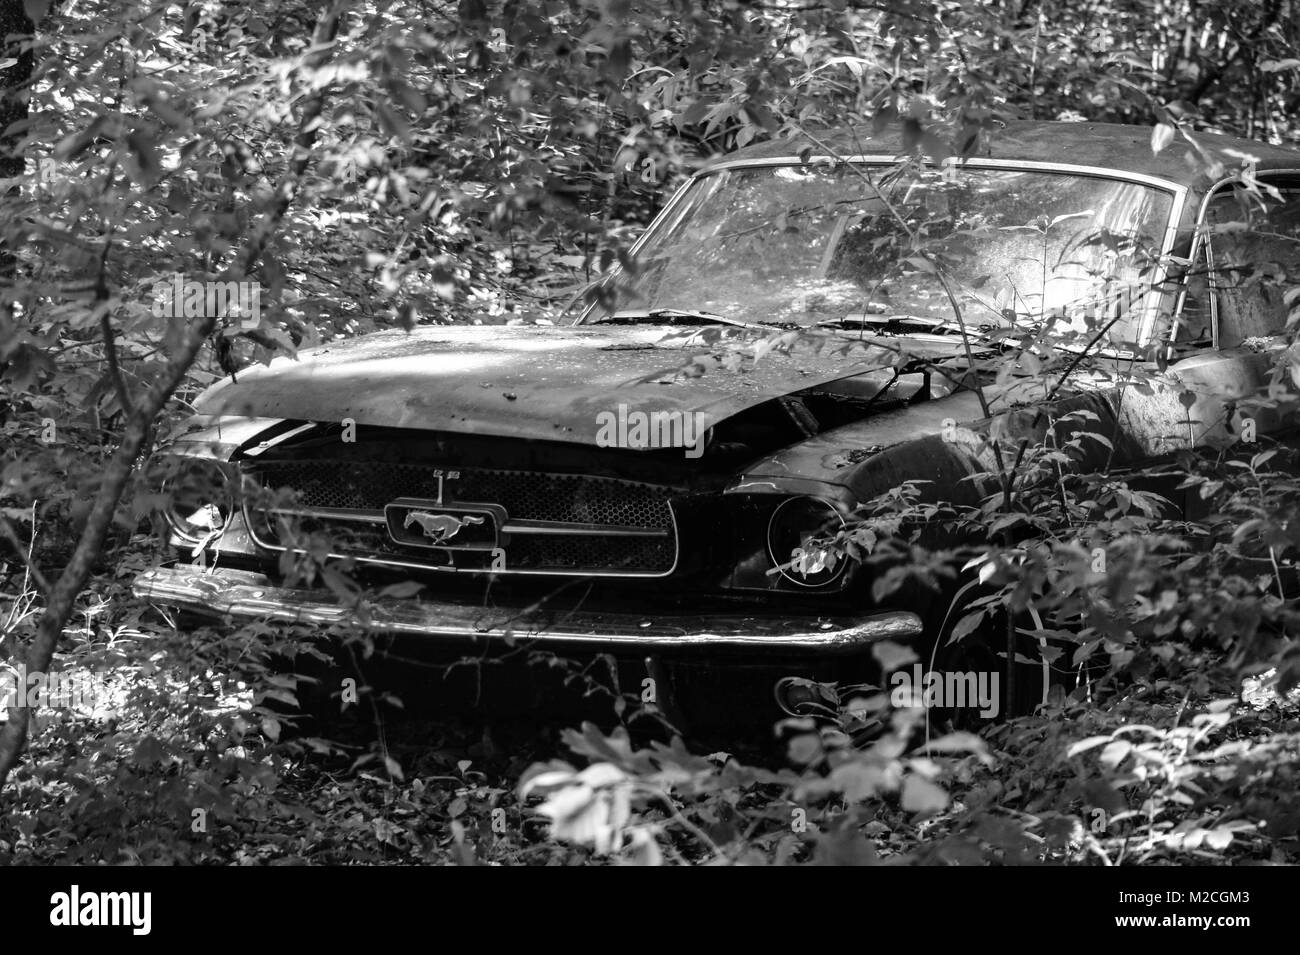 1966 Ford Fastback Mustang abandon in wooded are on a farm. Stock Photo